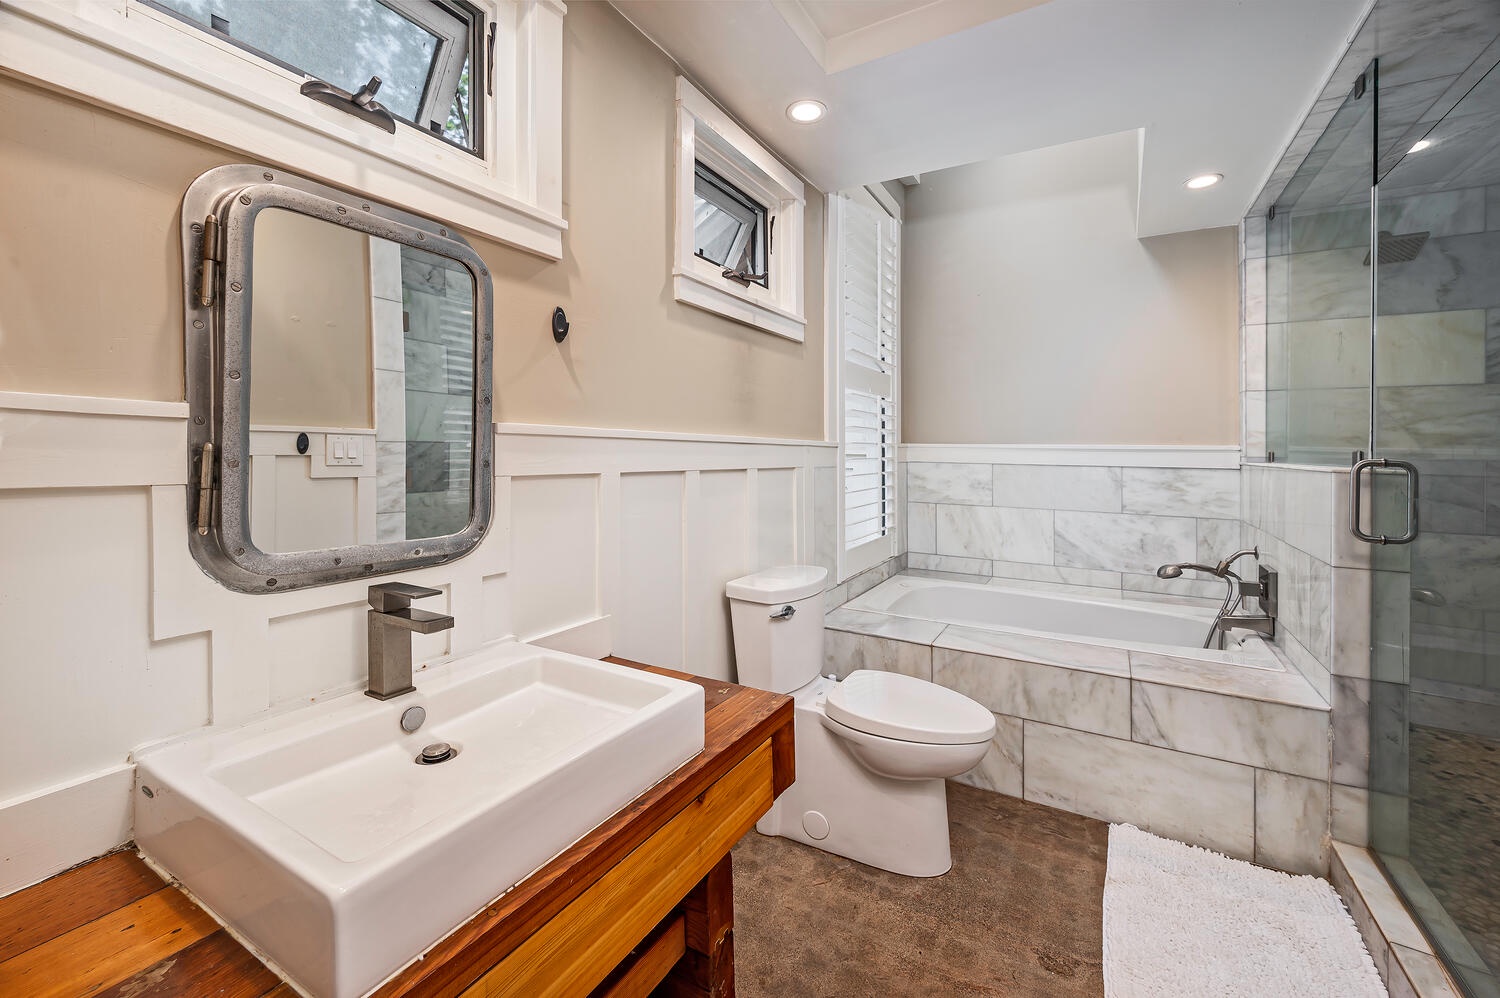 Haleiwa Vacation Rentals, Mele Makana - The primary bedroom ensuite is a full bathroom with a 2 person shower stall and soaking tub